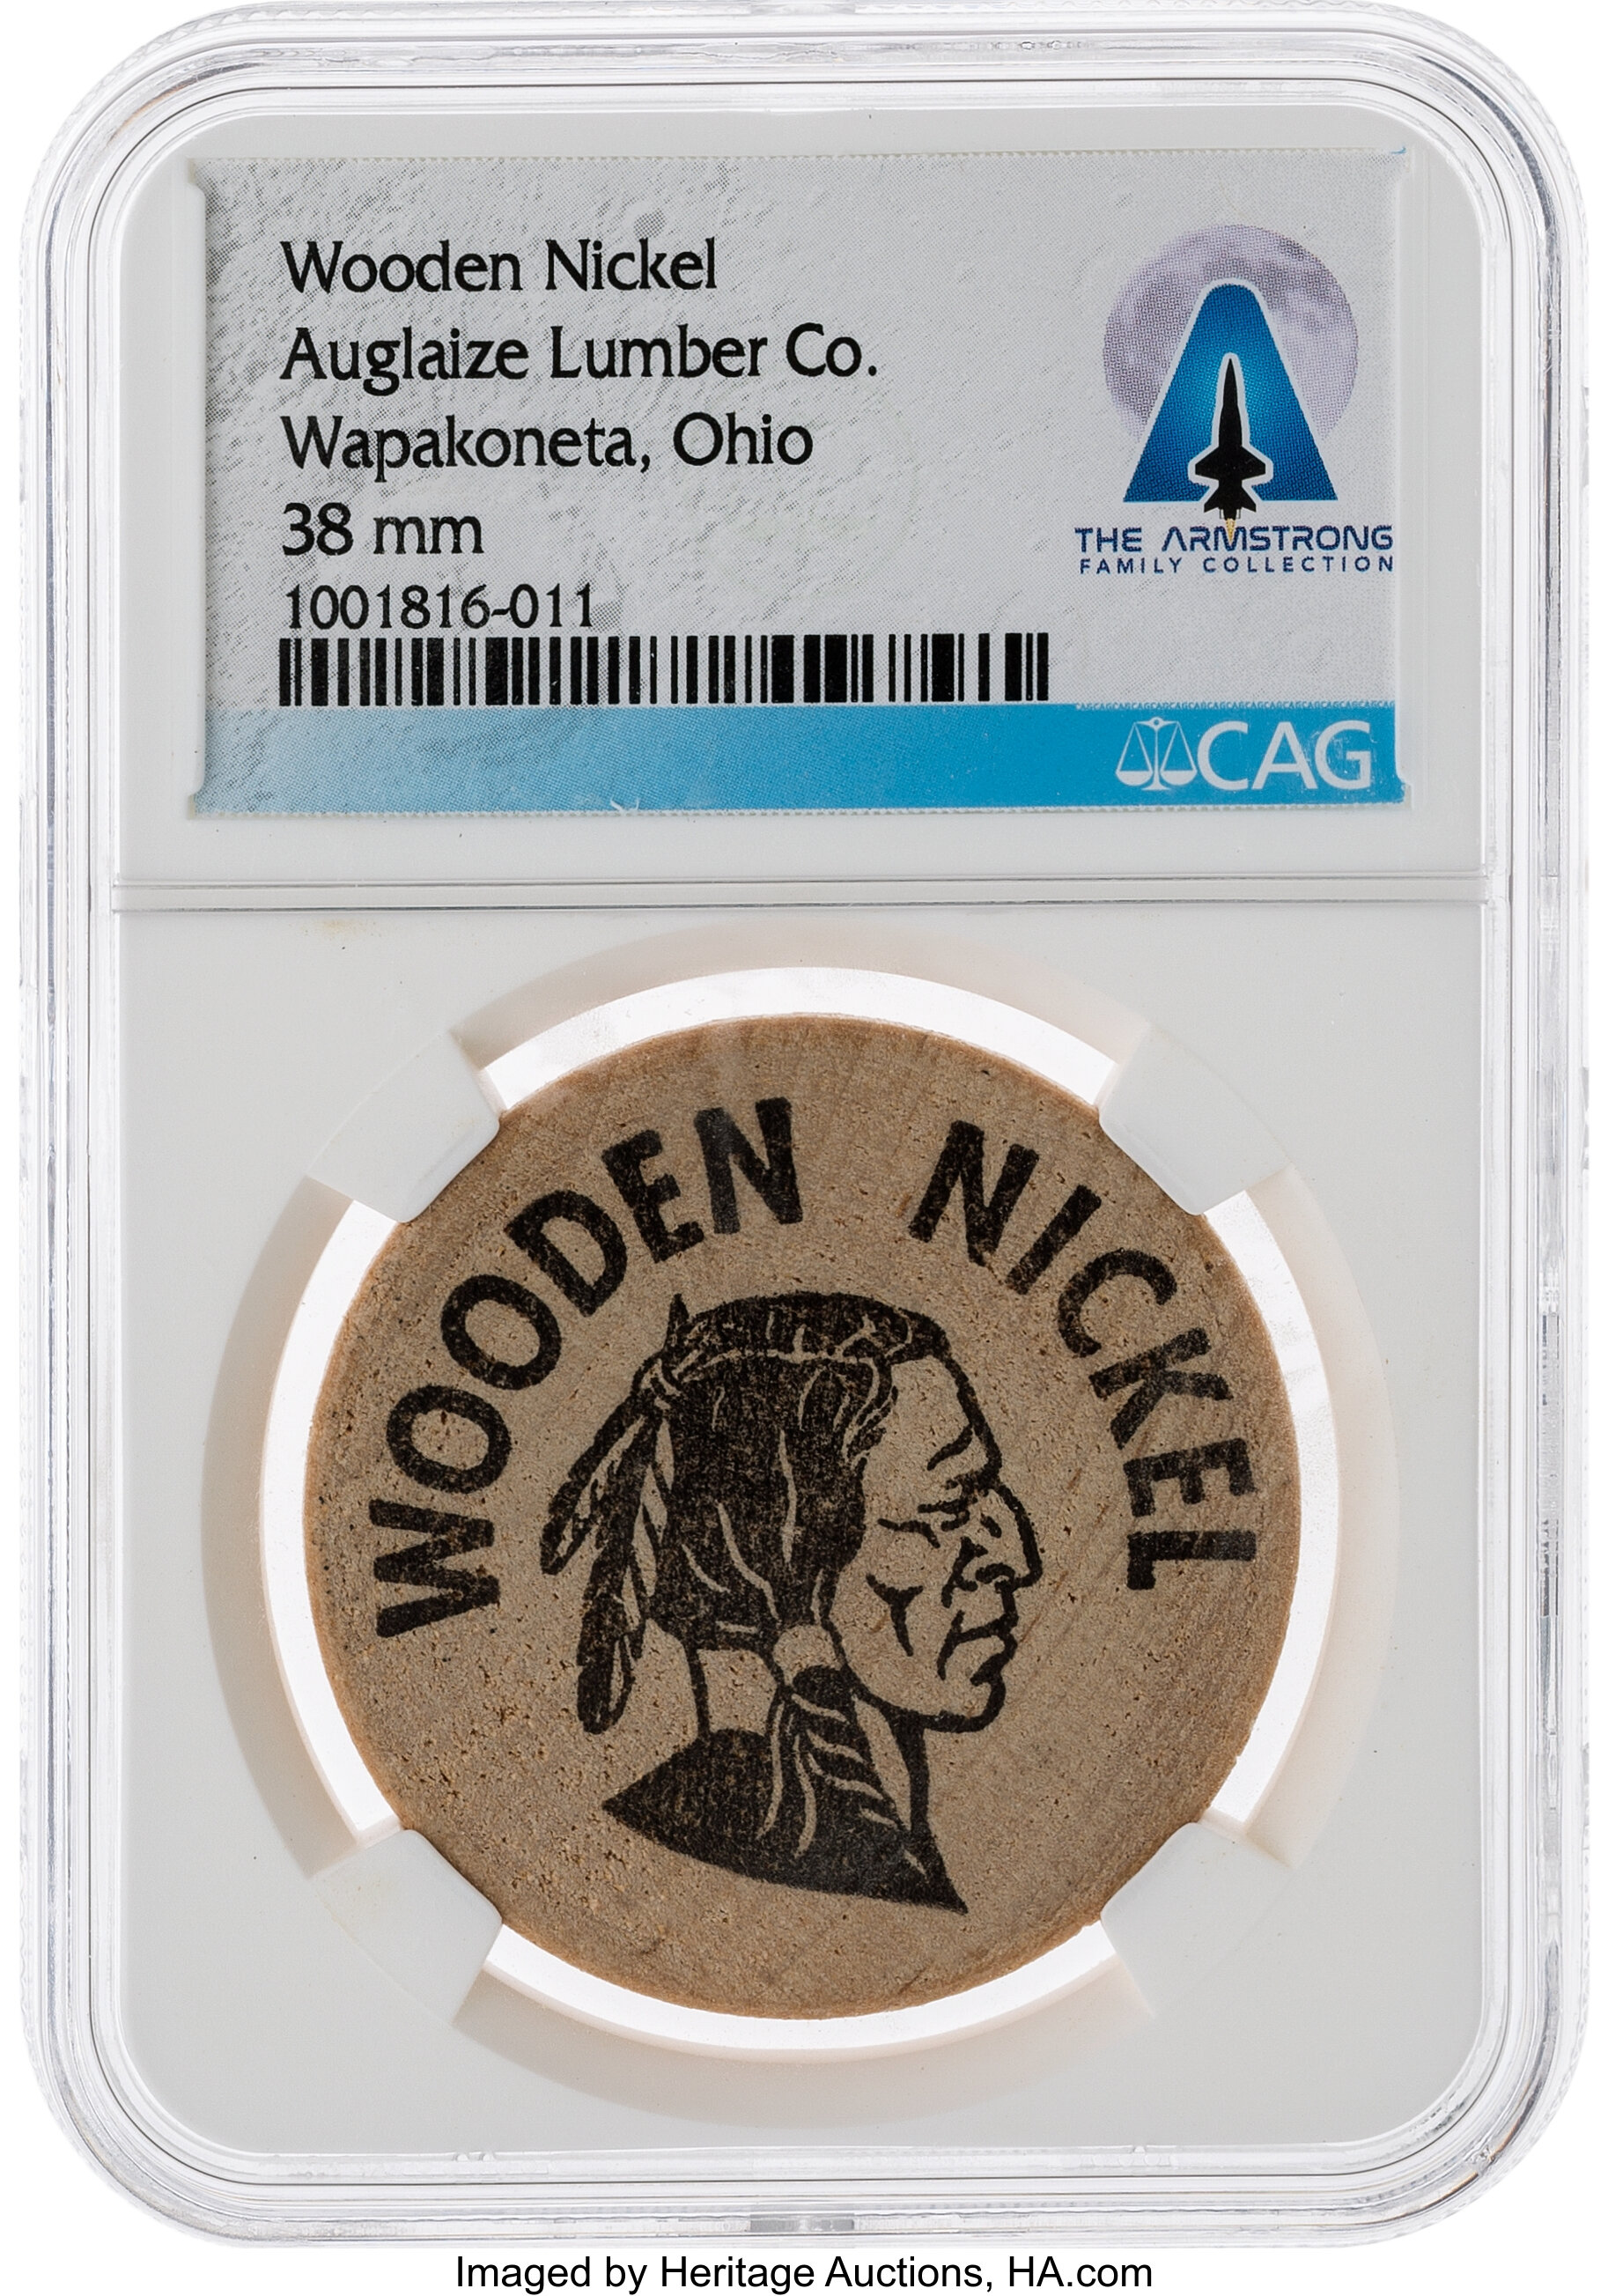 wapakoneta auglaize lumber co wooden nickel directly from the lot 50206 heritage auctions 2